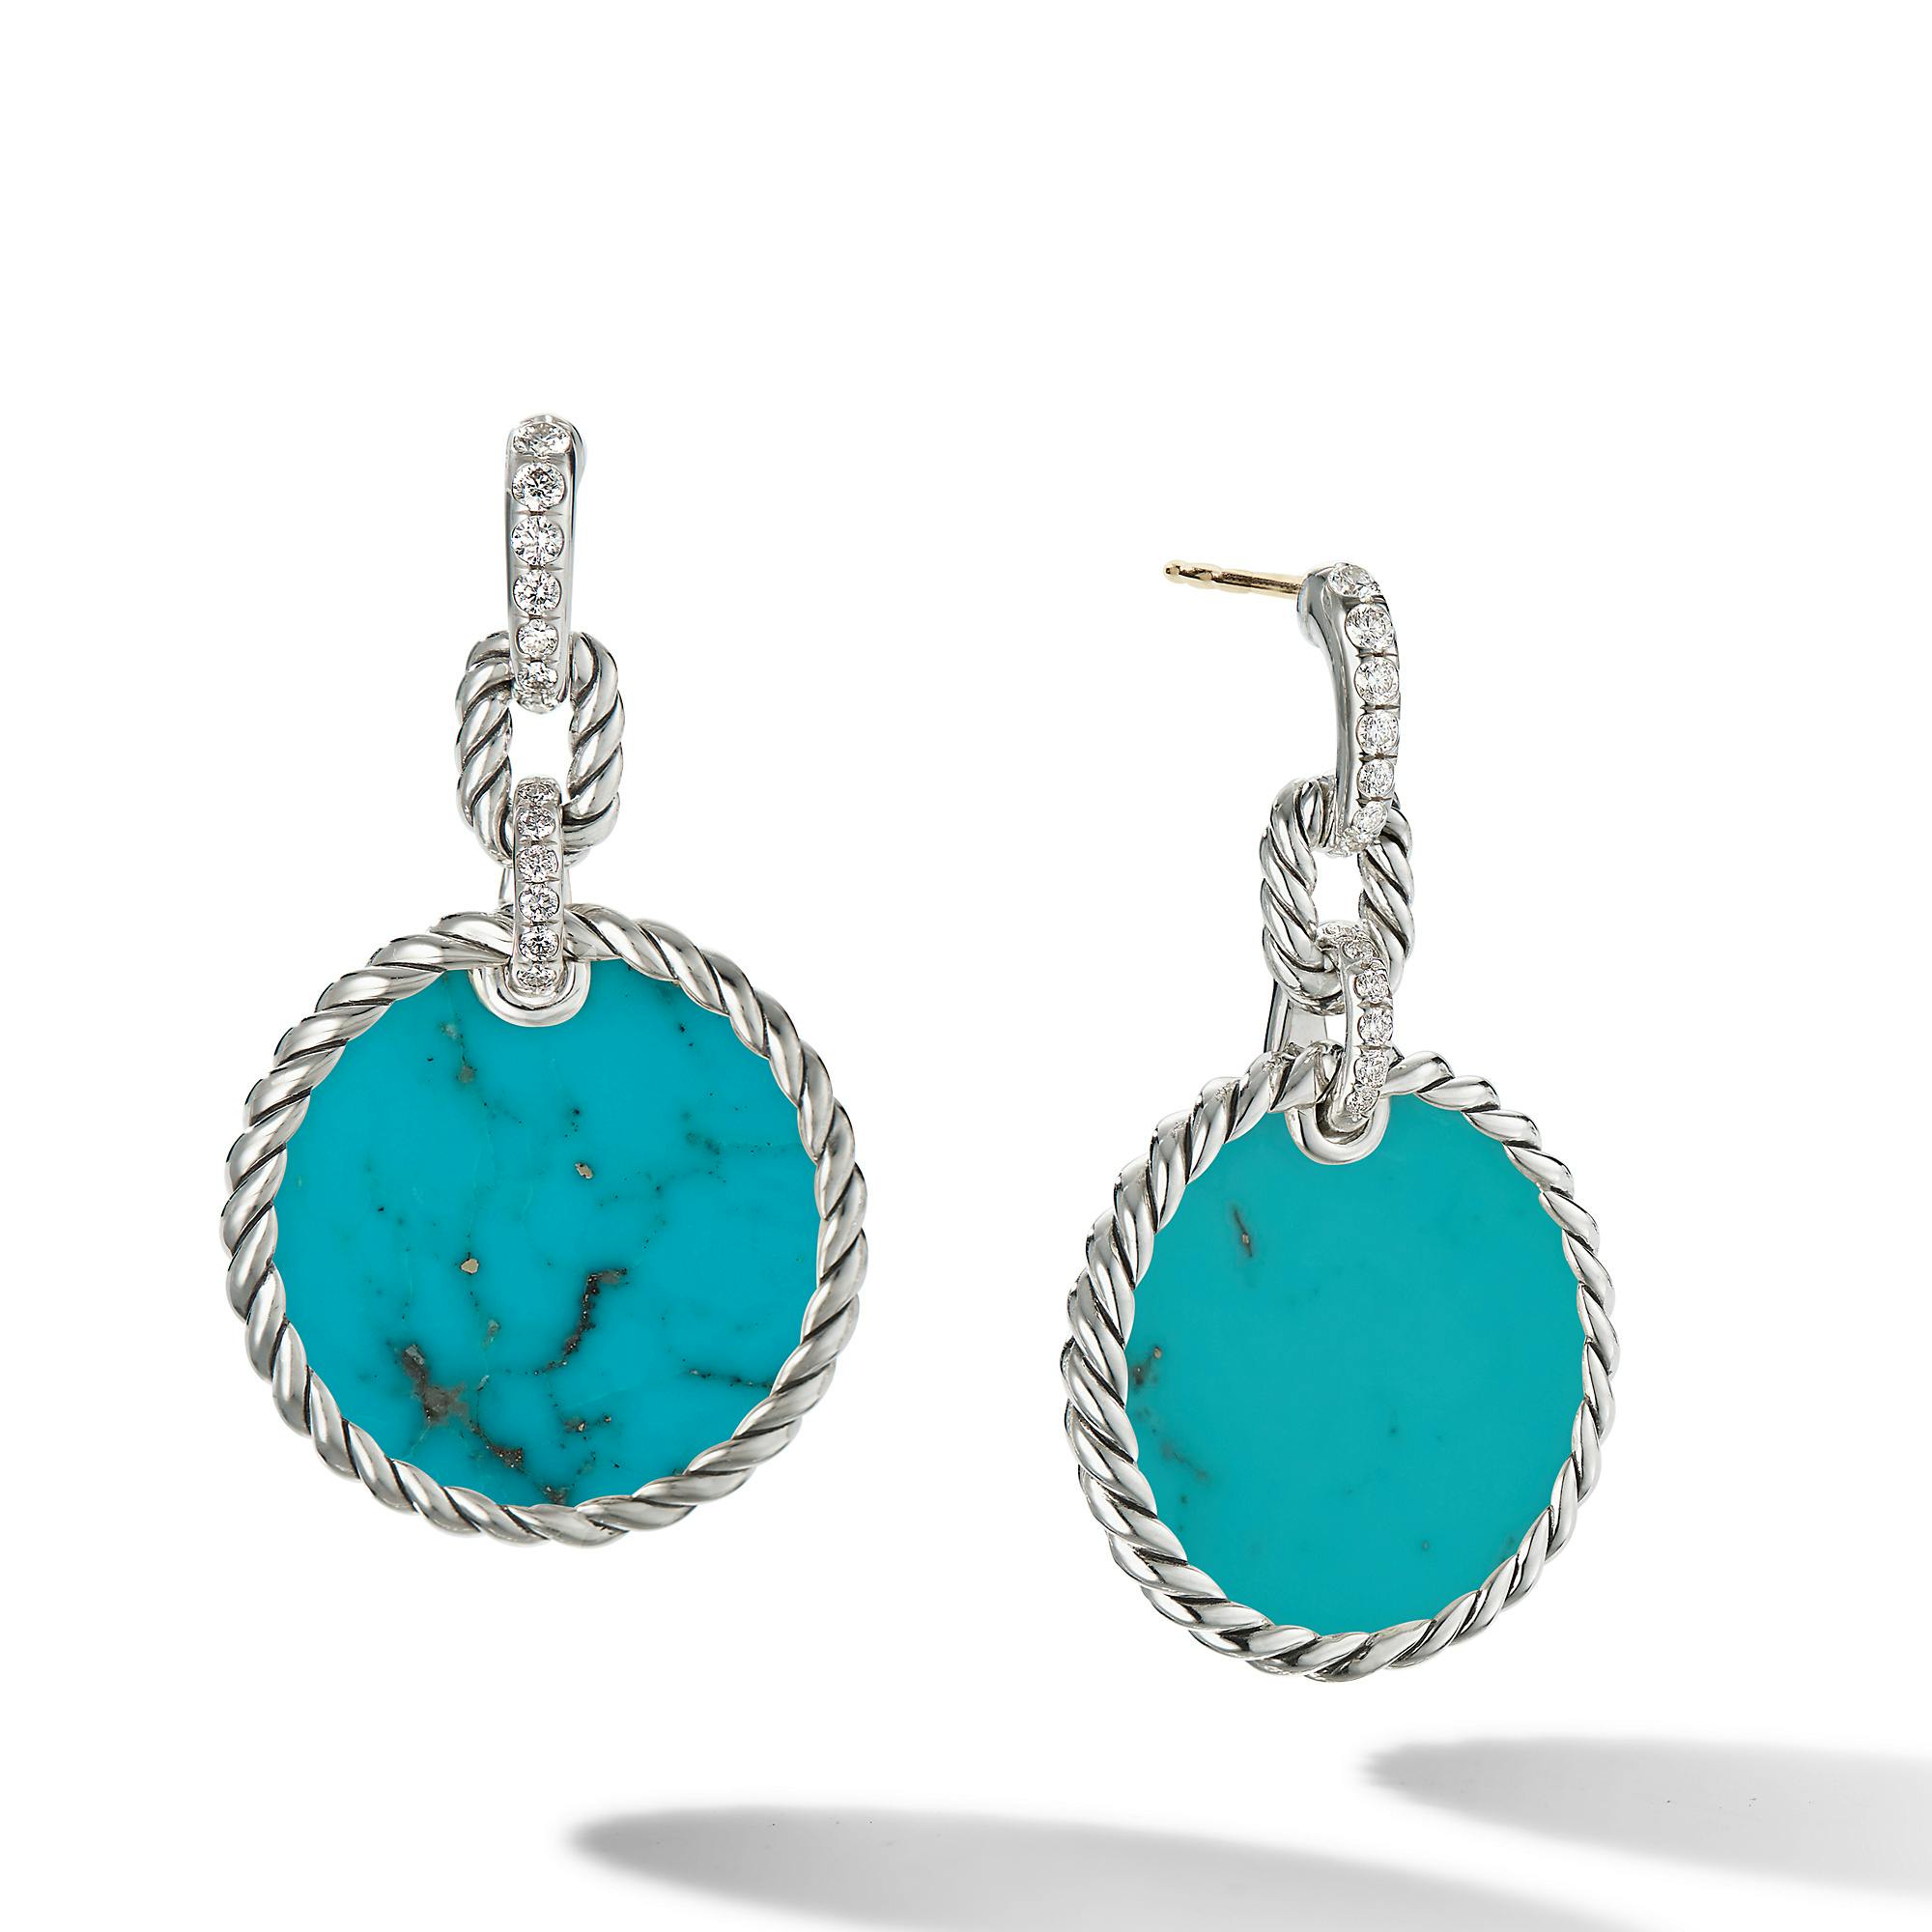 David Yurman DY Elements Drop Earrings with Turquoise and Pave Diamonds